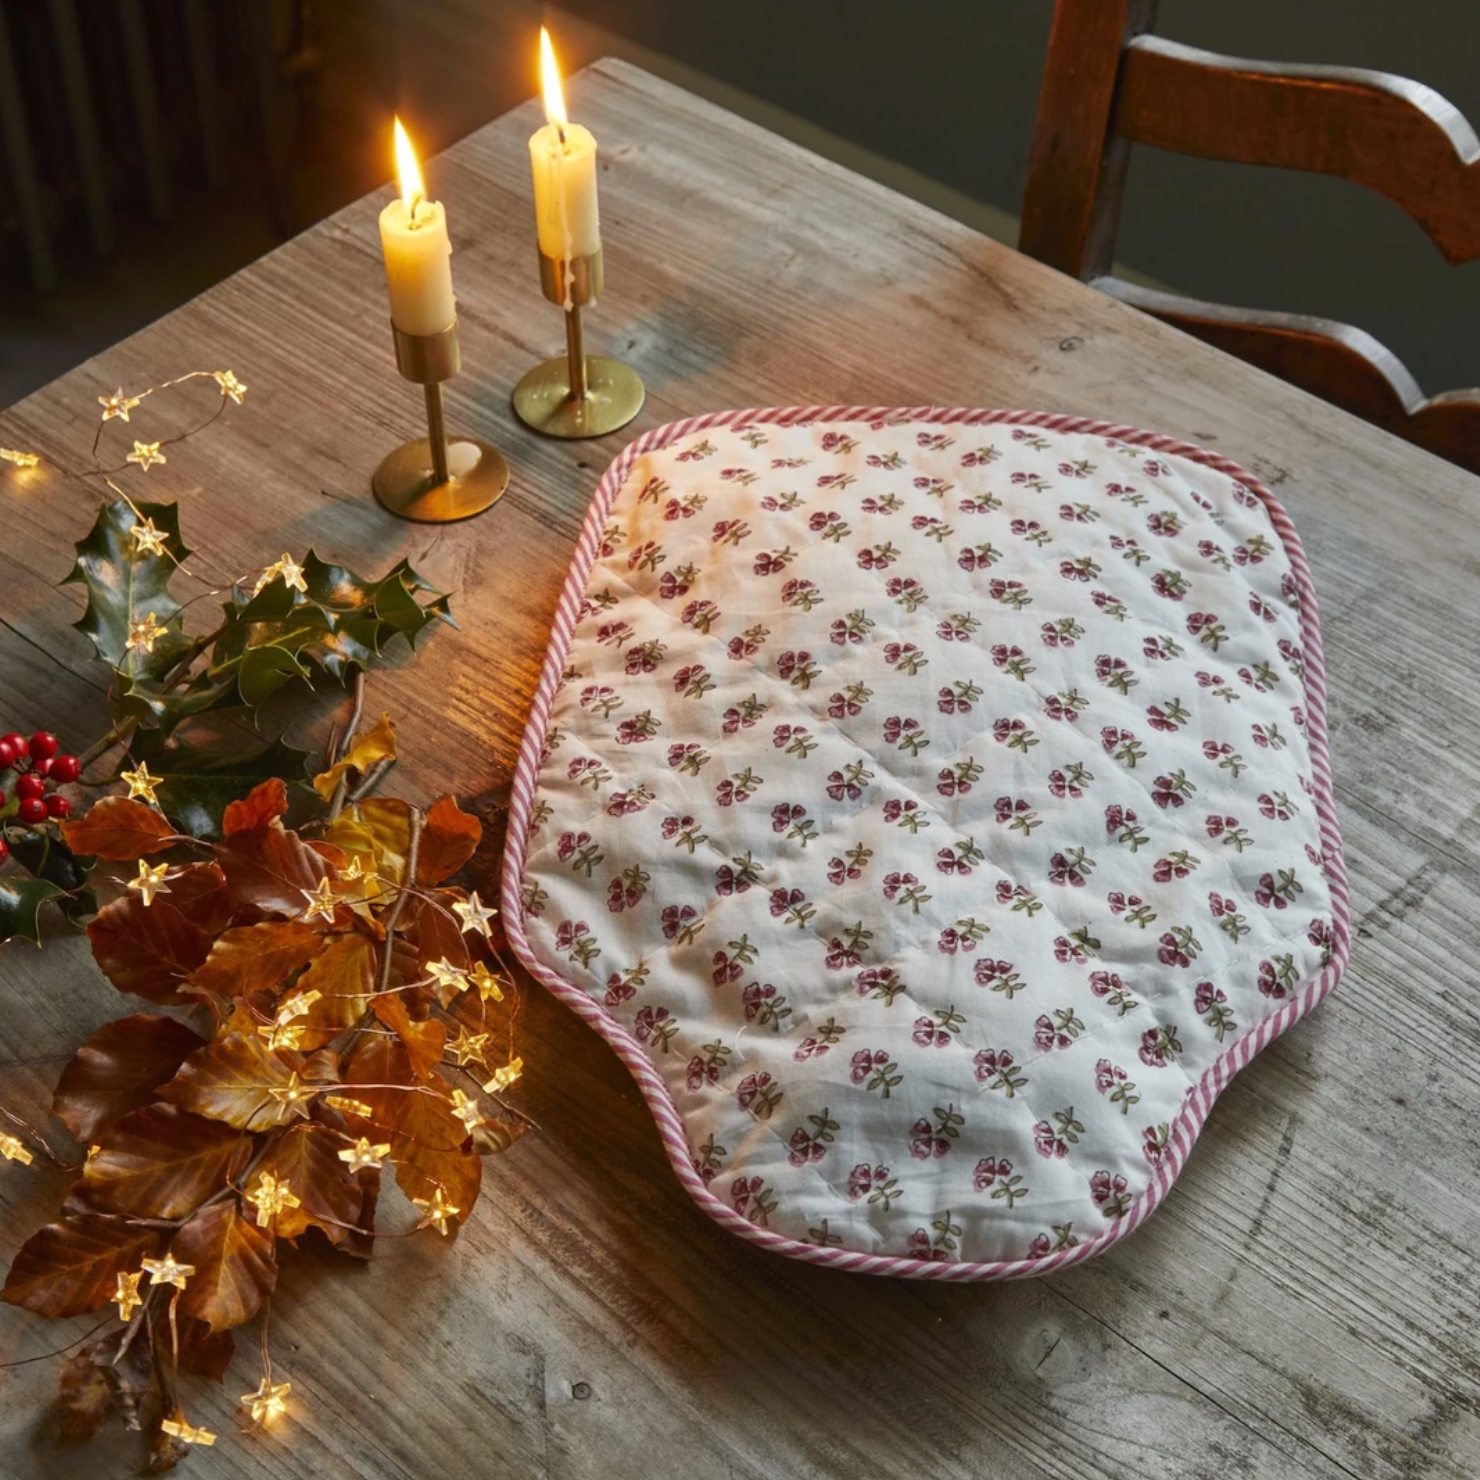 Stylish hot water bottles to curl up with